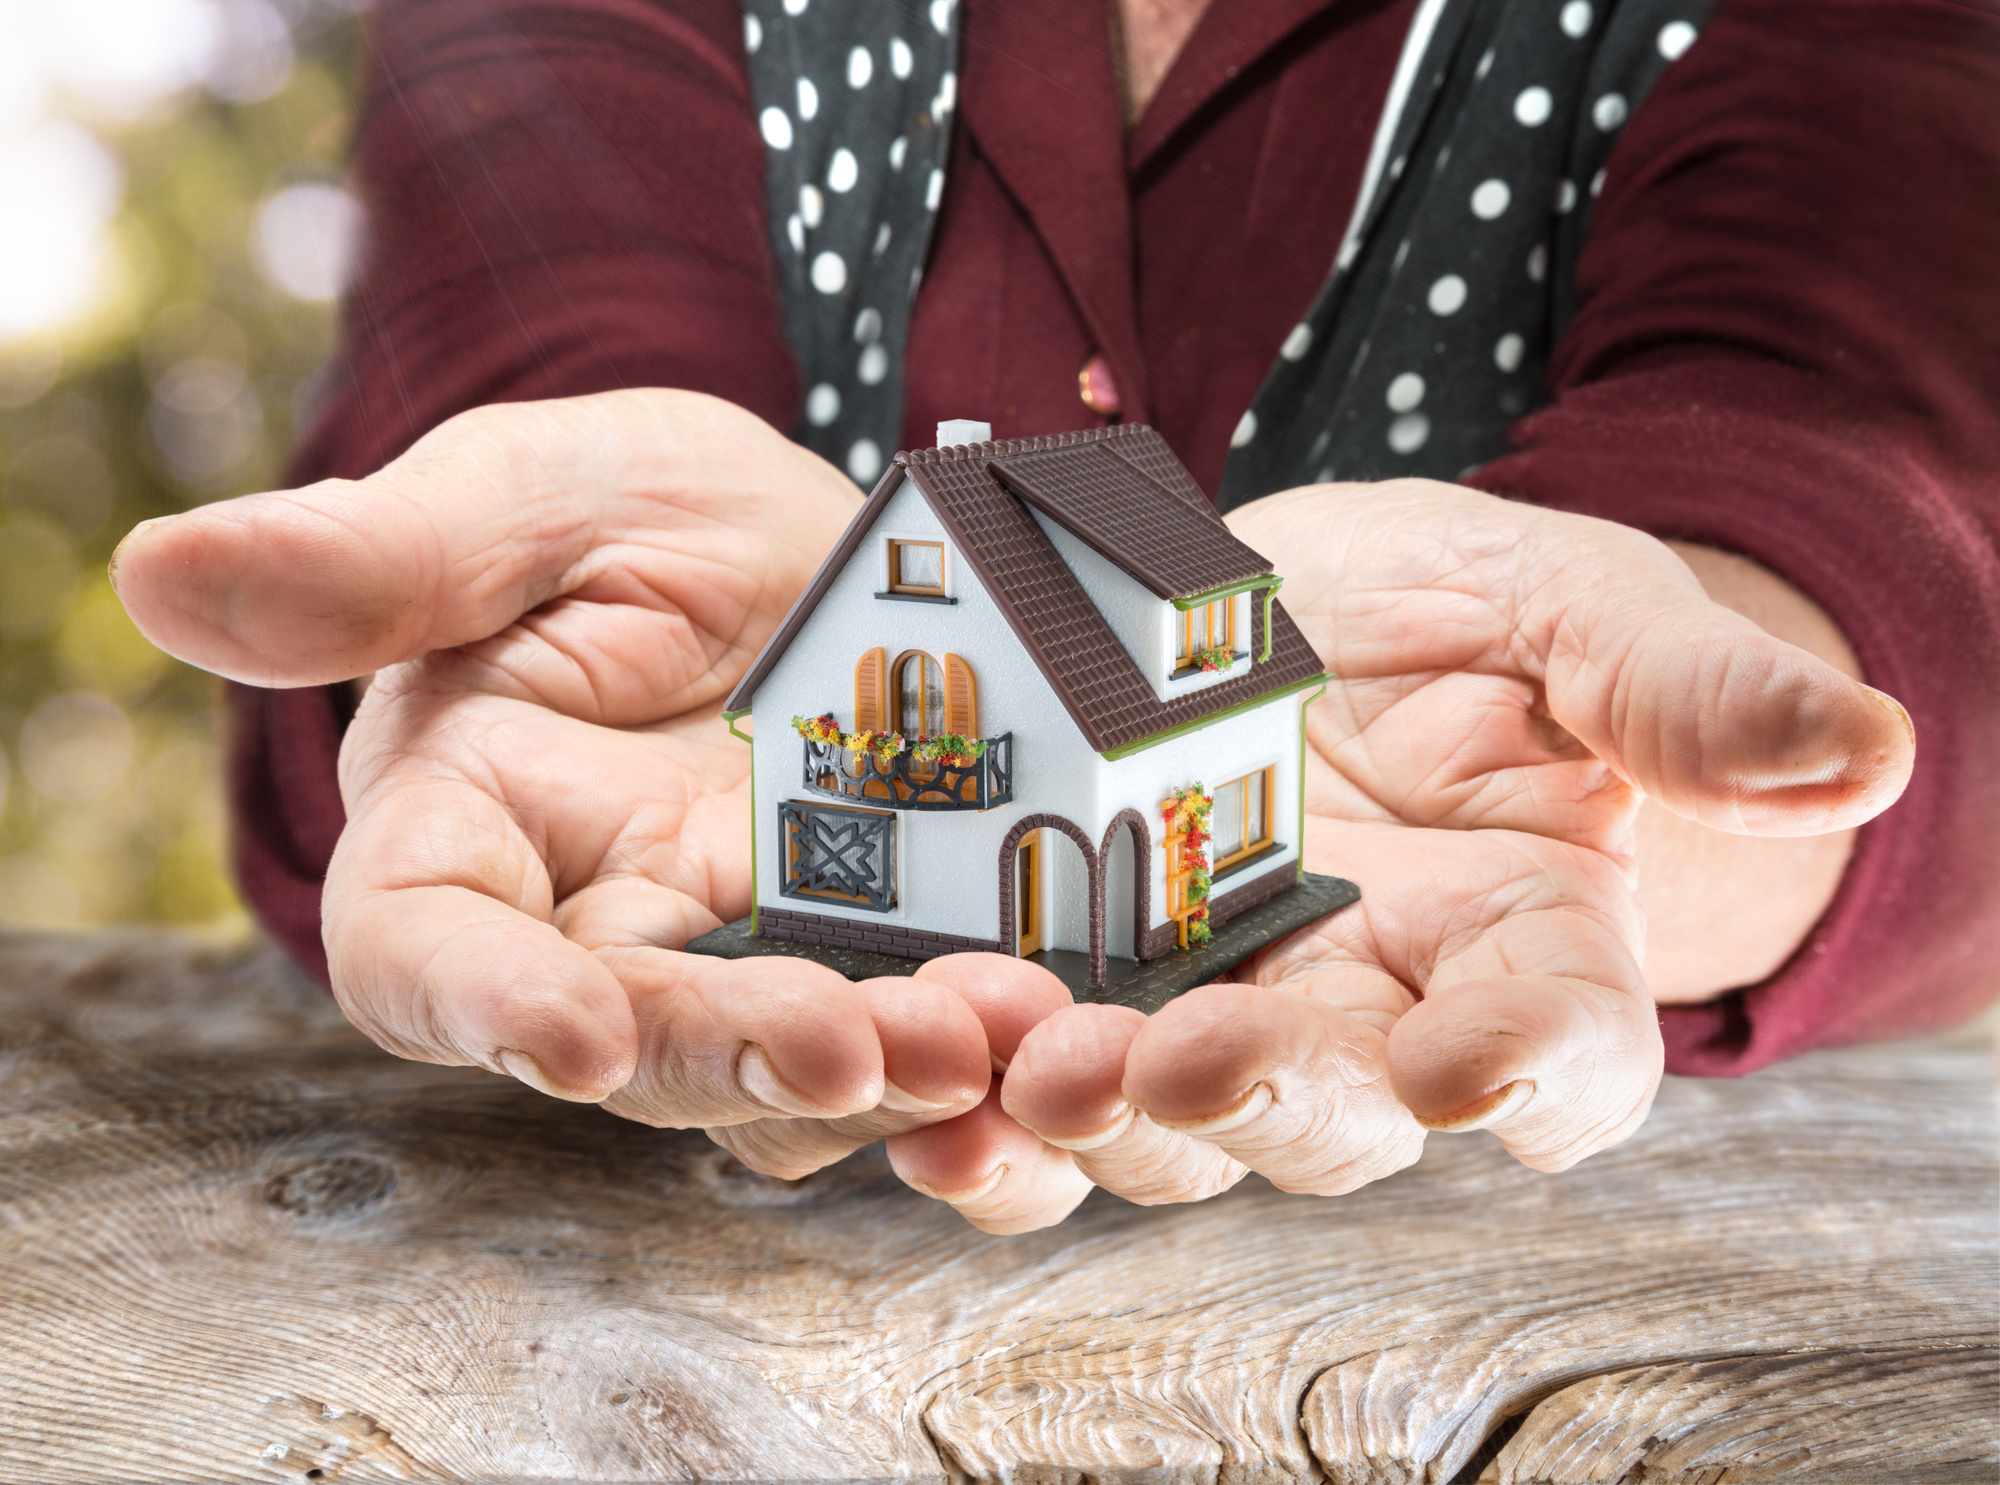 closeup of person’s hands holding model house, inheritance law